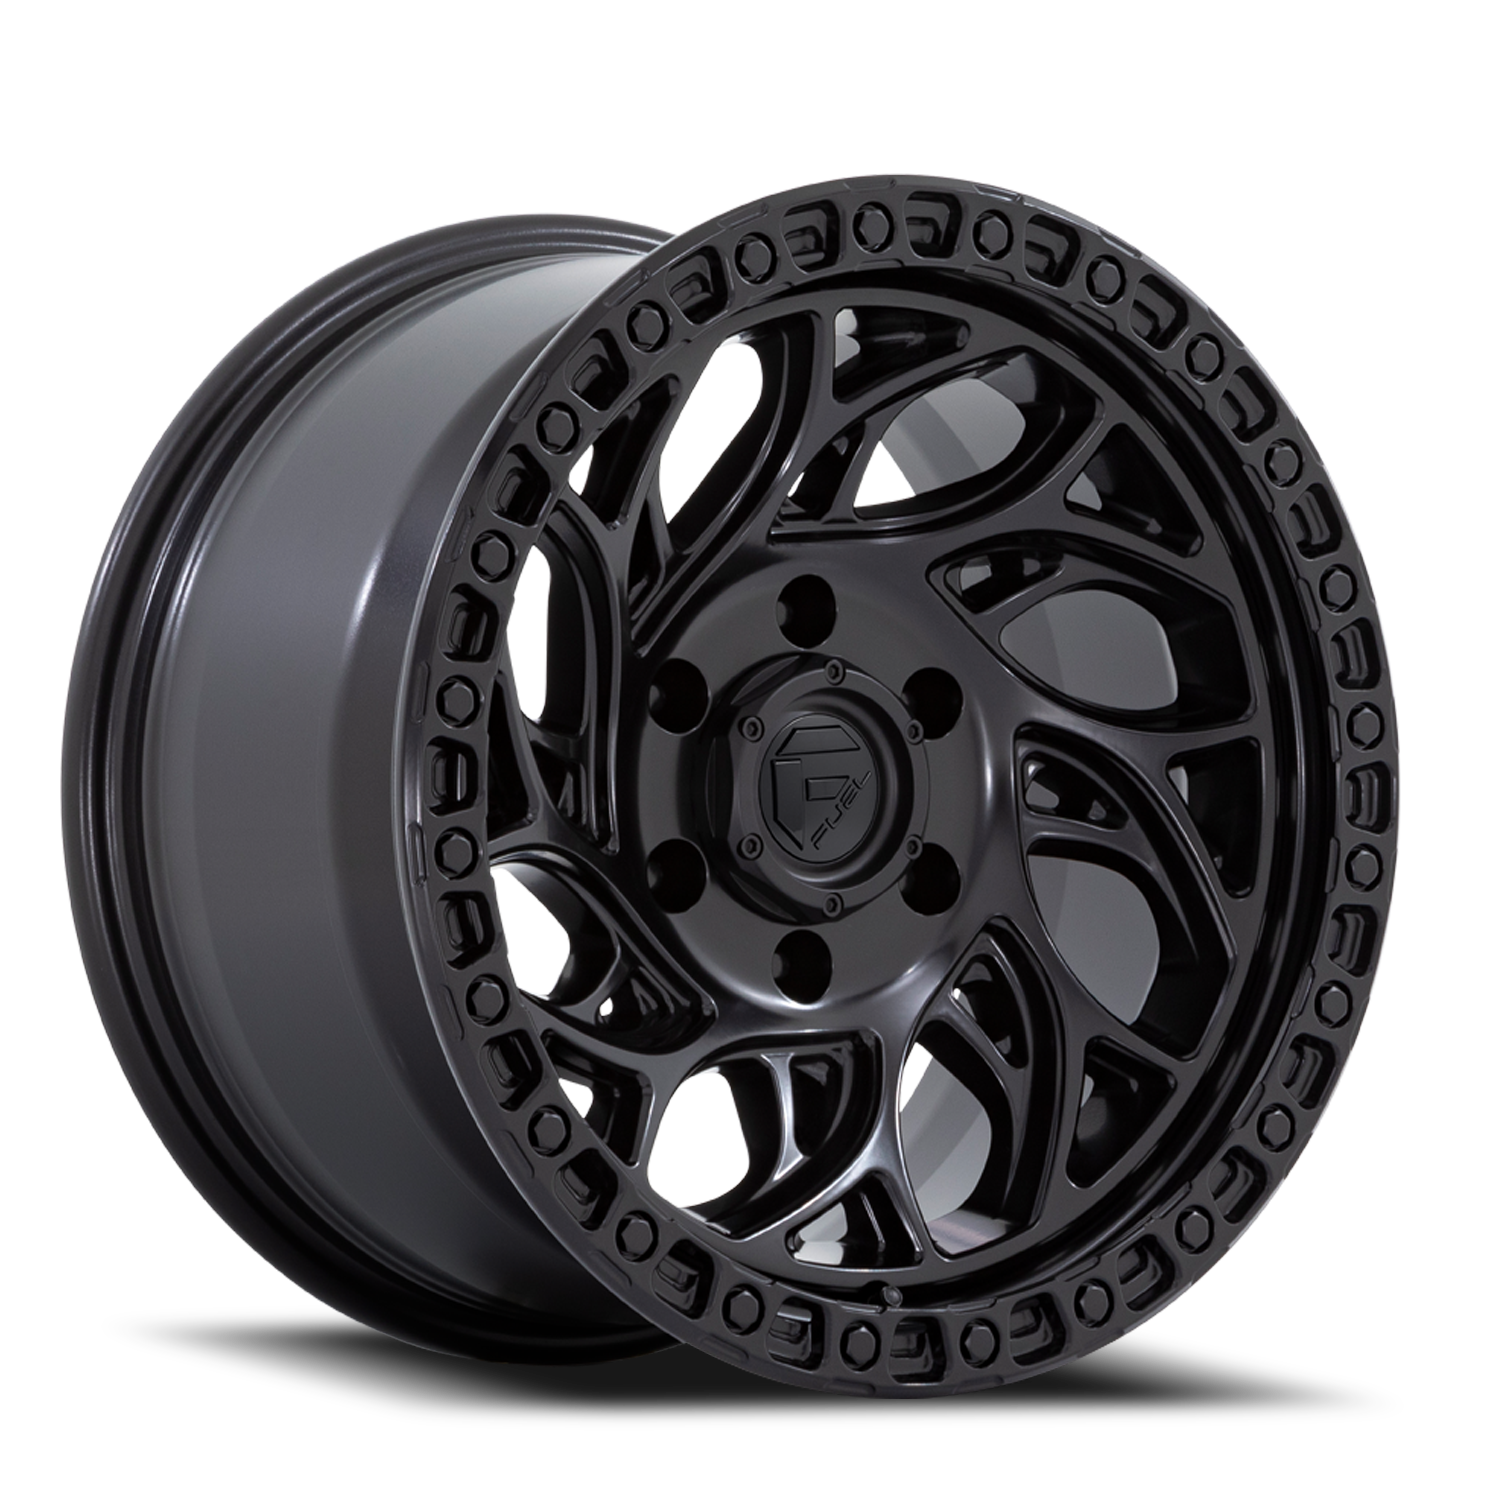 Aluminum Wheels 17X9 Runner OR D852 6 On 139.7 Blackout 106.1 Bore -12 Offset Fuel Off Road Wheels